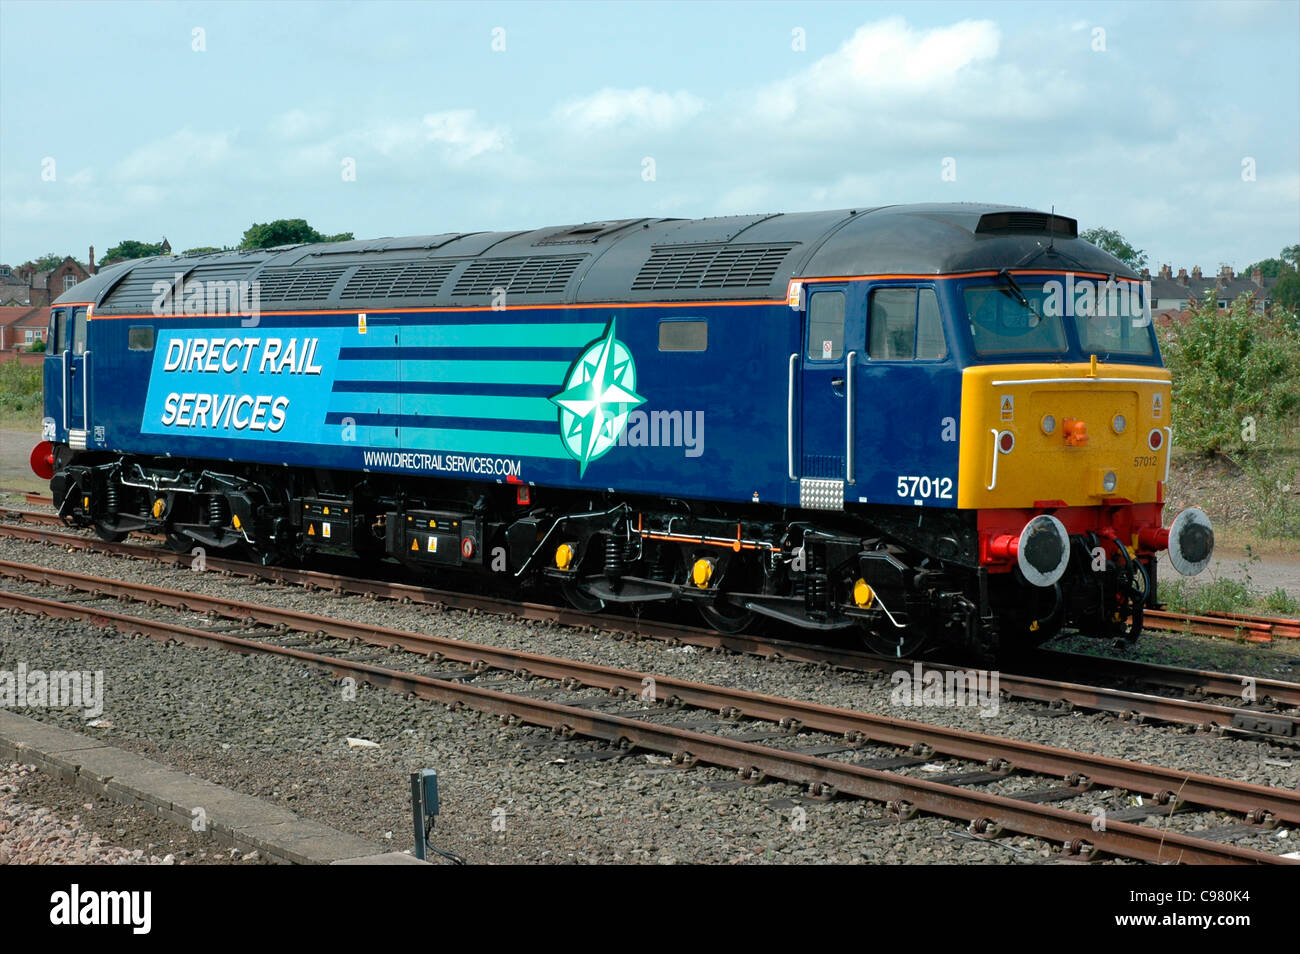 Direct Rail Services Diesel-Electric Loco No. 57012 at York station, England, UK Stock Photo